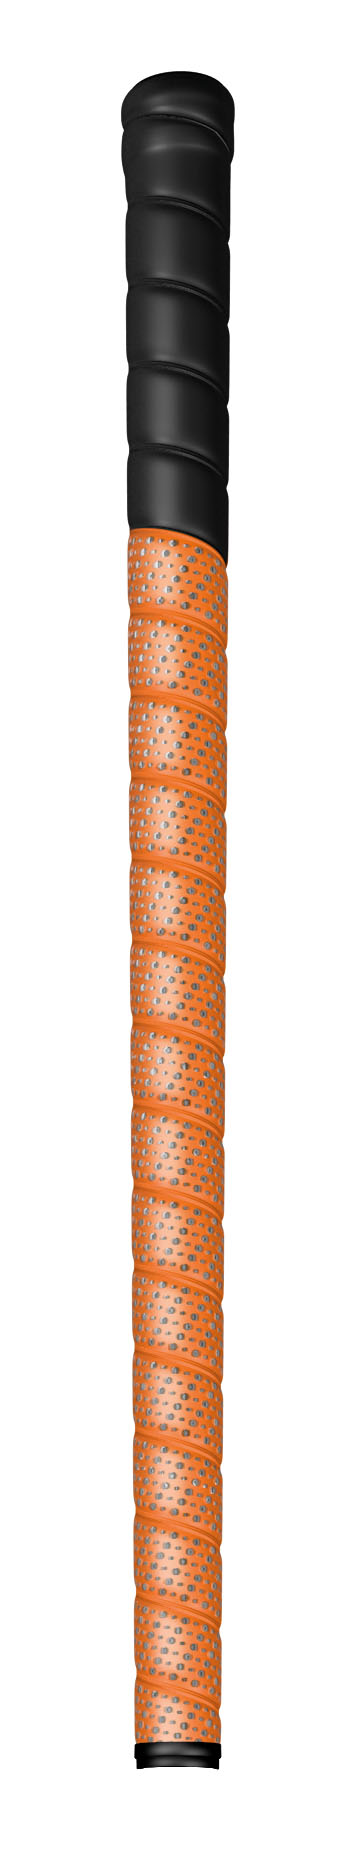 Fatpipe G-Series grip